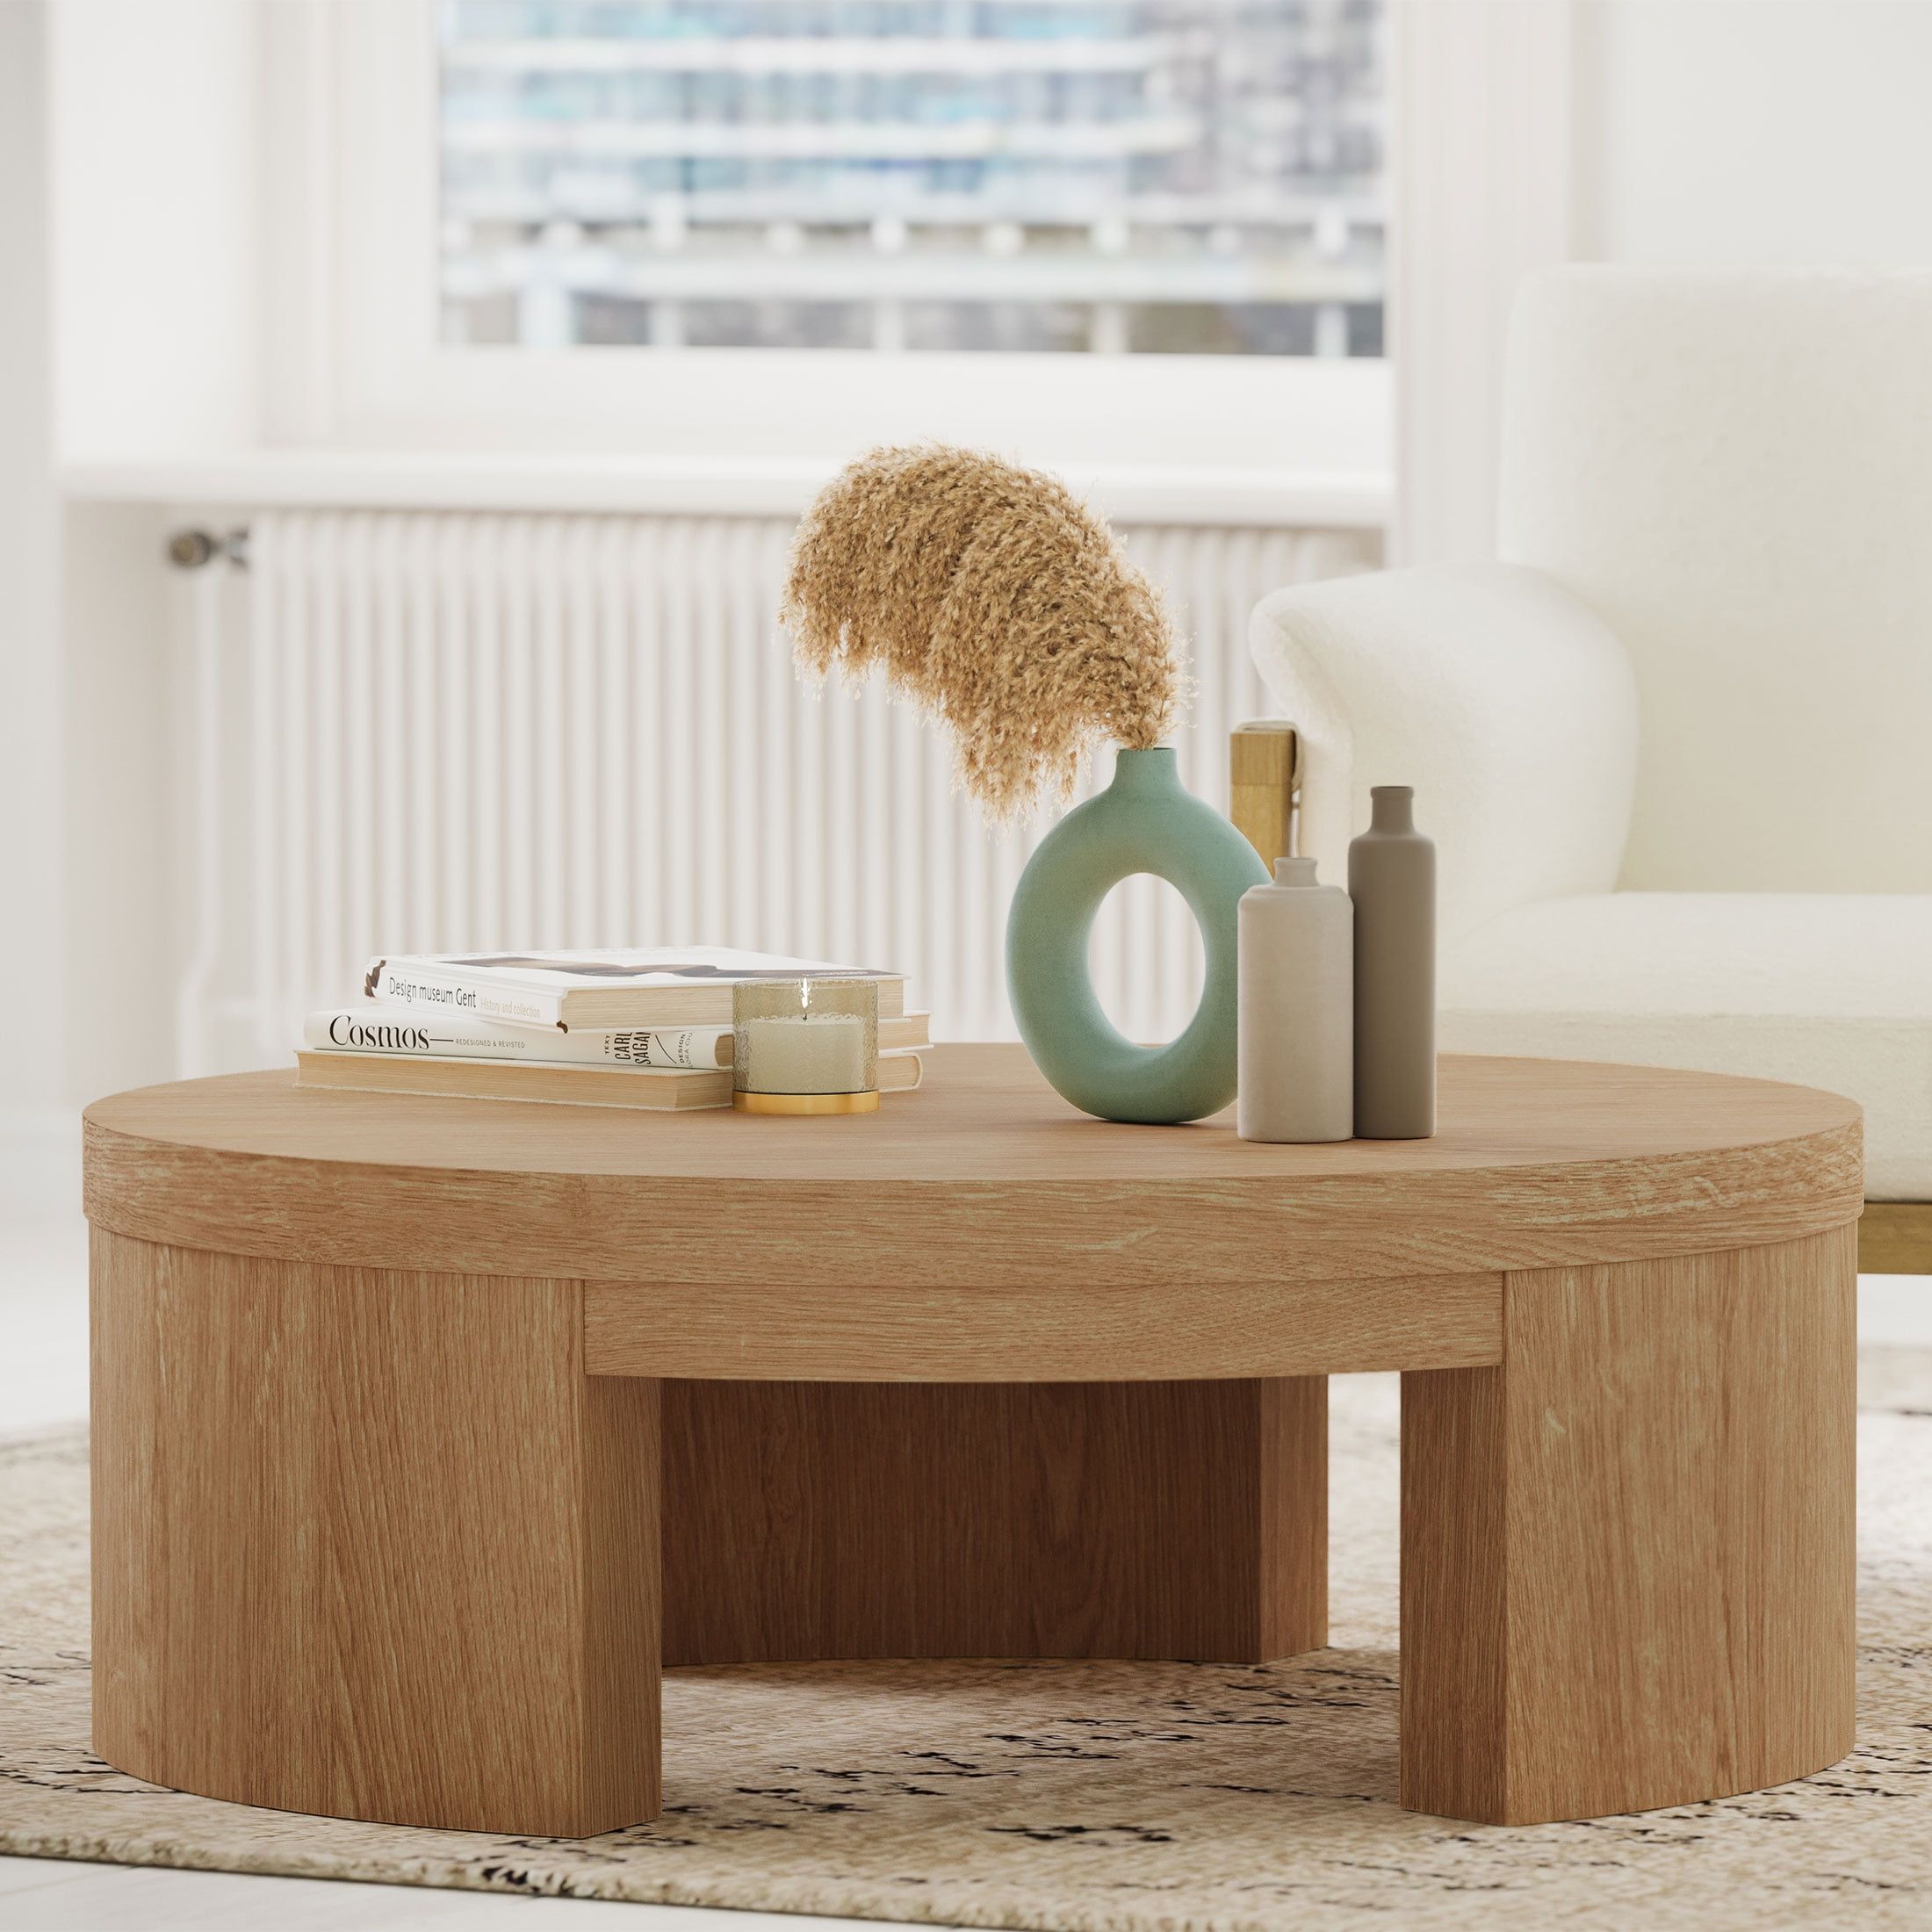 Beautiful Mod Round Coffee Tabledrew Barrymore, Warm Honey Finish –  Walmart For Modern Wooden X Design Coffee Tables (View 12 of 15)